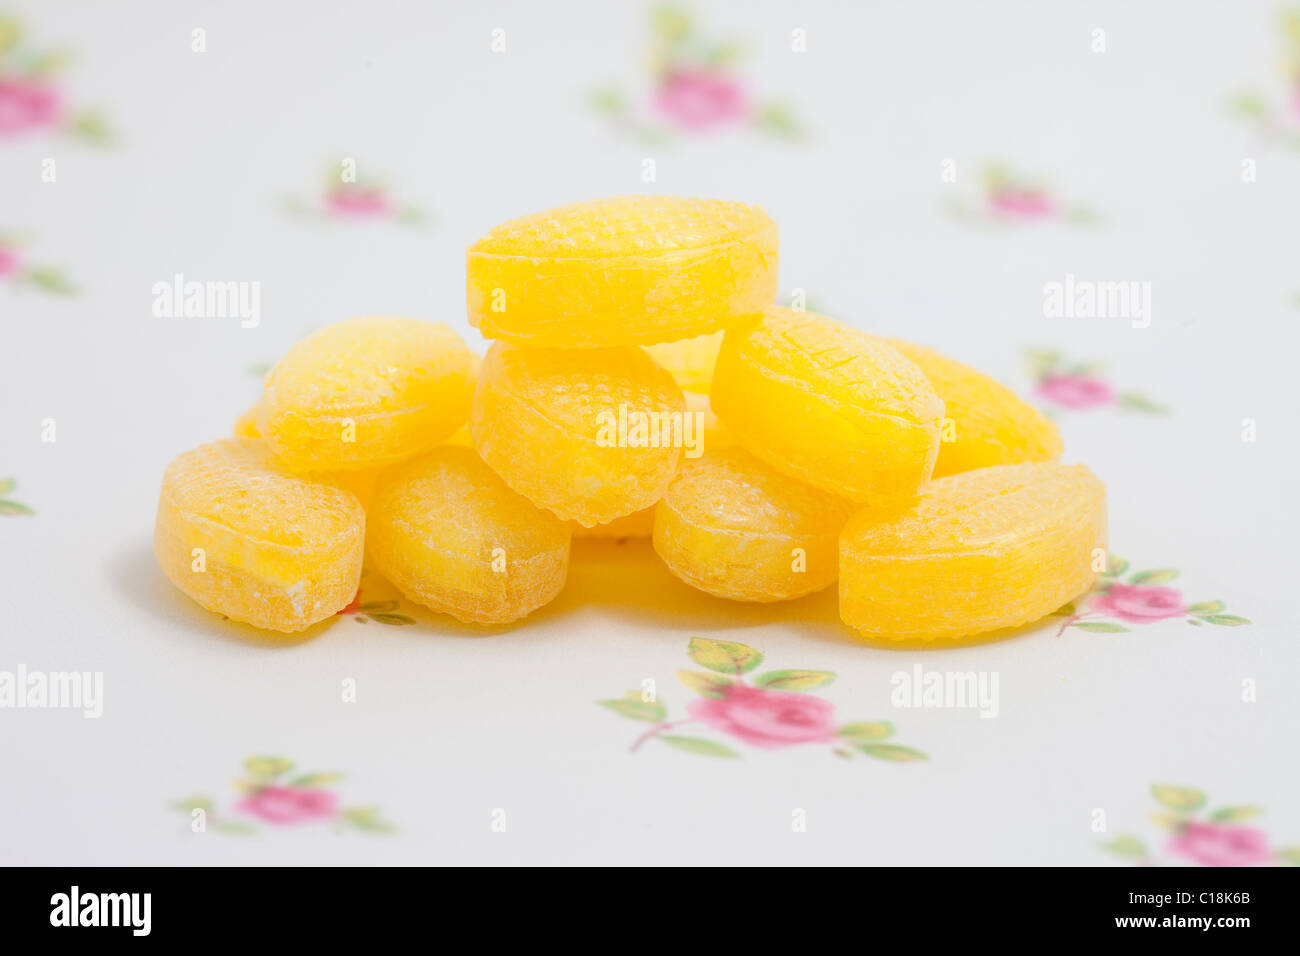 sherbet lemons, sweets and candy on a paper background photographed in a studio Stock Photo